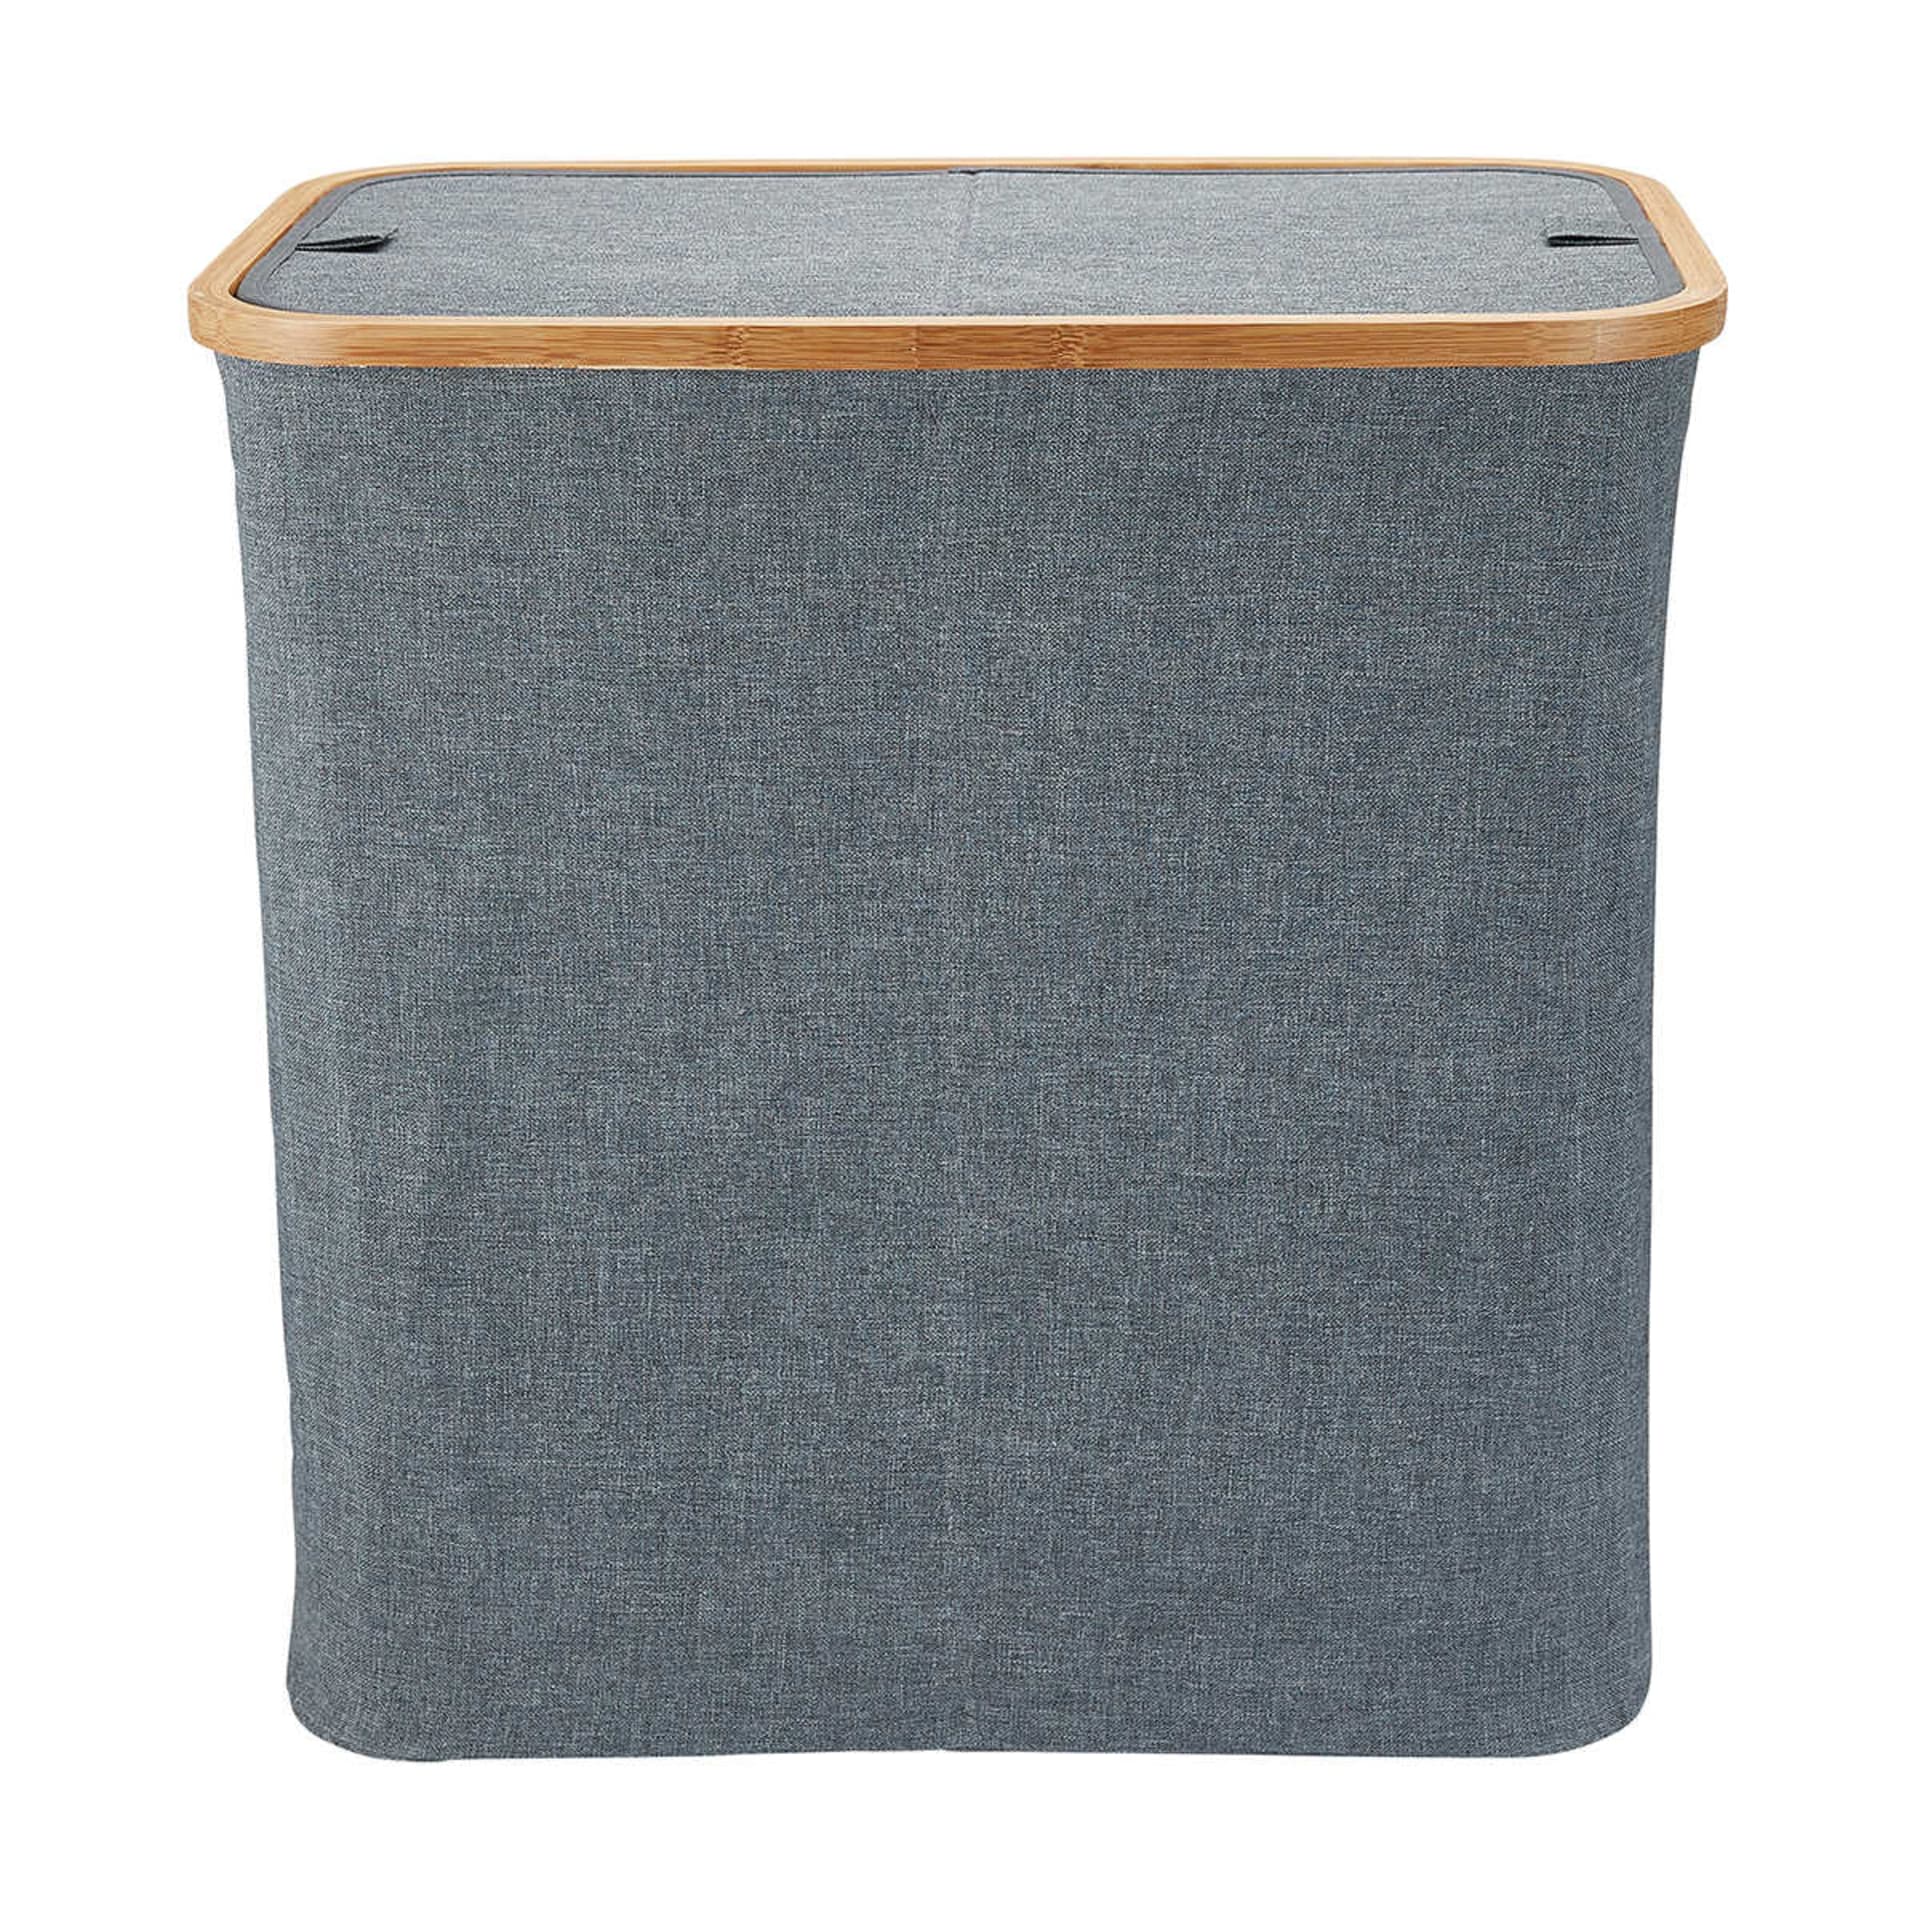 Twin Laundry Hamper with Bamboo Frame - Kmart